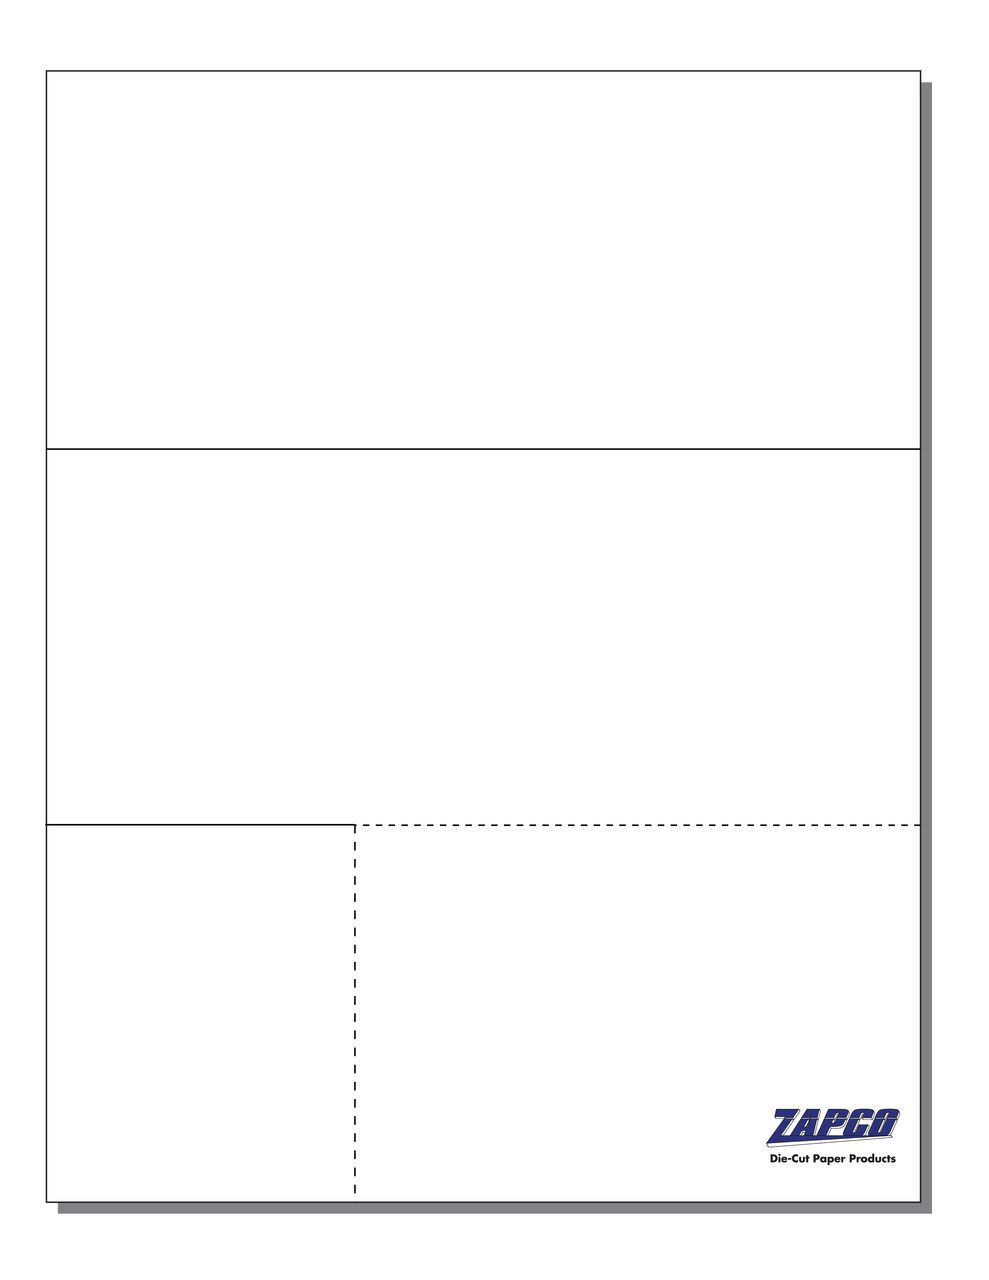 Item 104: 1-Up 3 3/4" x 8 1/2" Tri-Fold Mailer with Return Post Card 8 1/2" x 11" Sheet